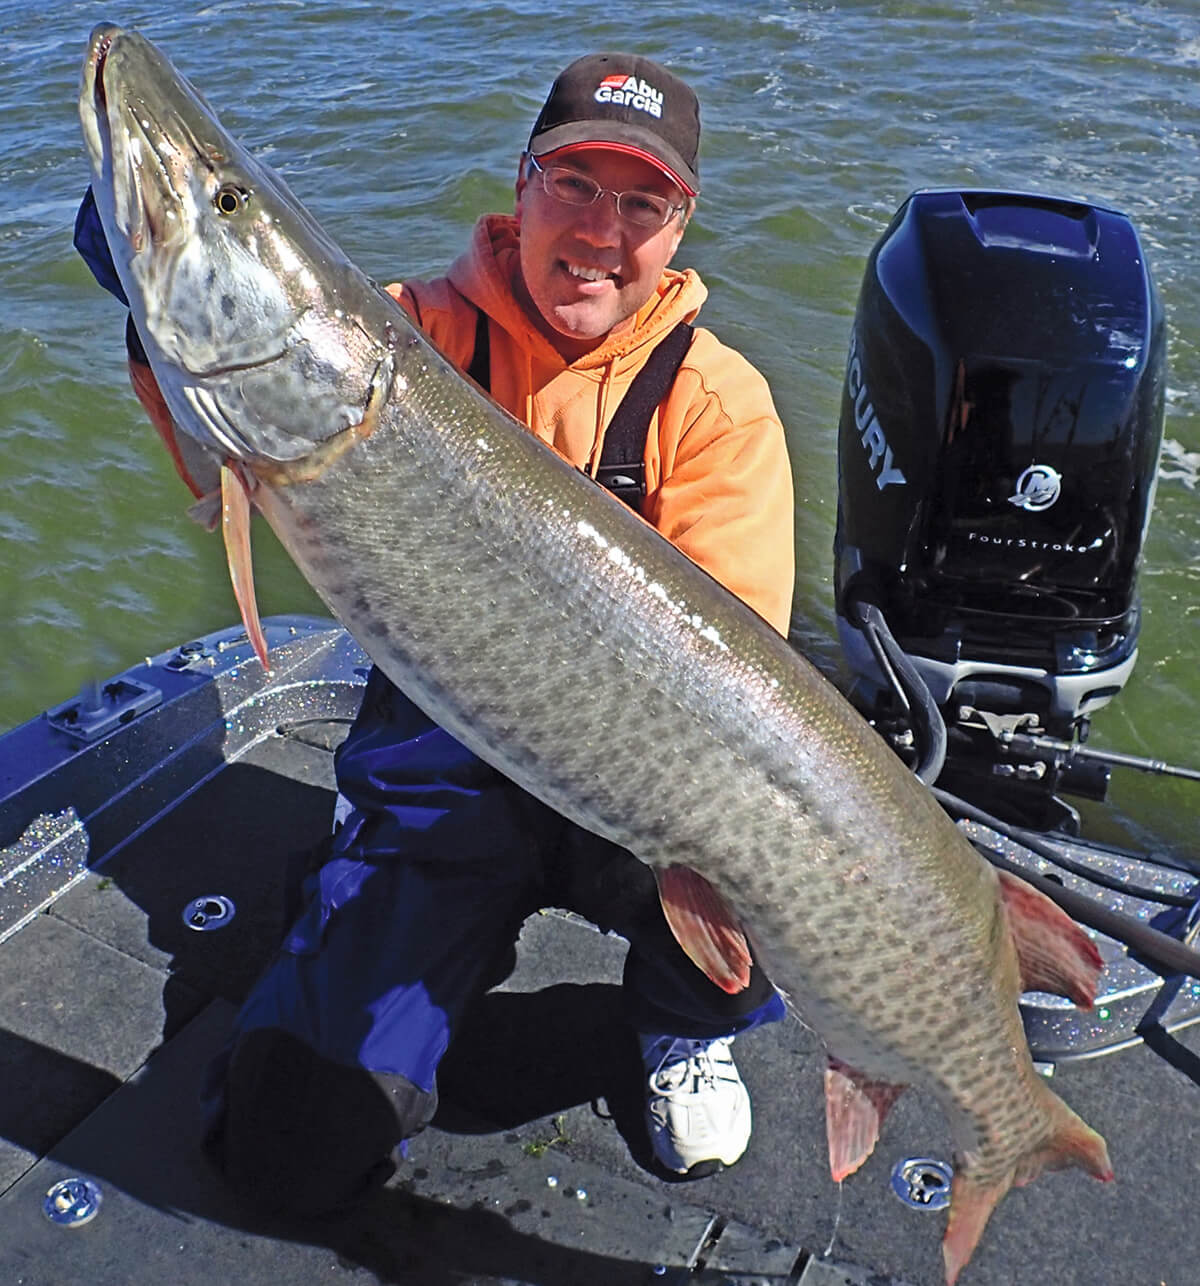 Angler Steve Ryan posing with a large muskie in a boat in open water